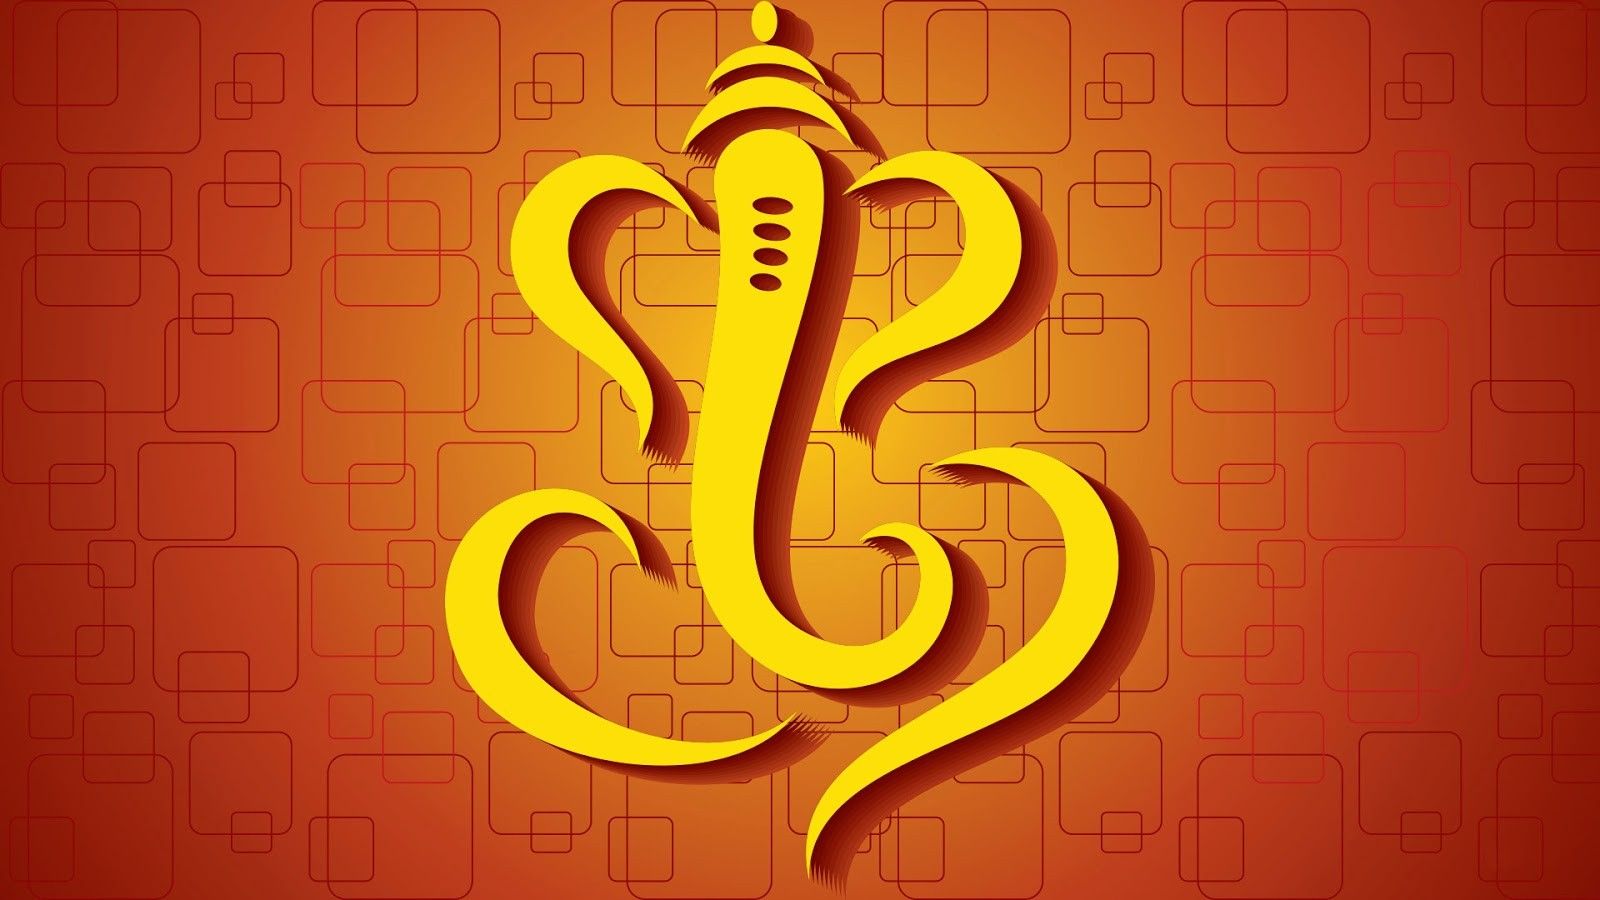 Ganesh Stickers for Sale | Redbubble